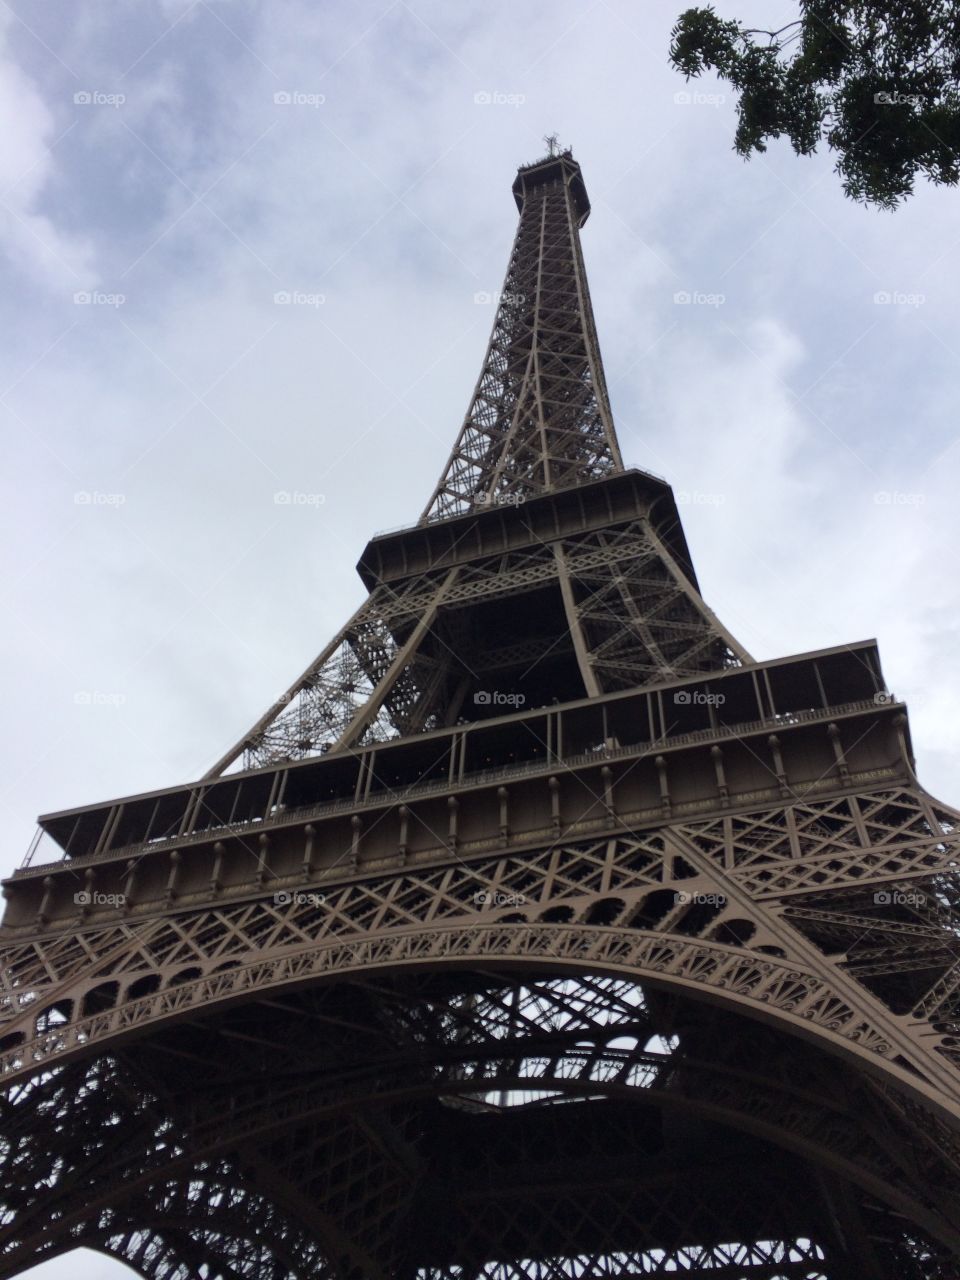 Eiffel Tower in July . Original picture of the Eiffel Tower in Paris, France! Taken in July 2014 on an IPhone 5s 